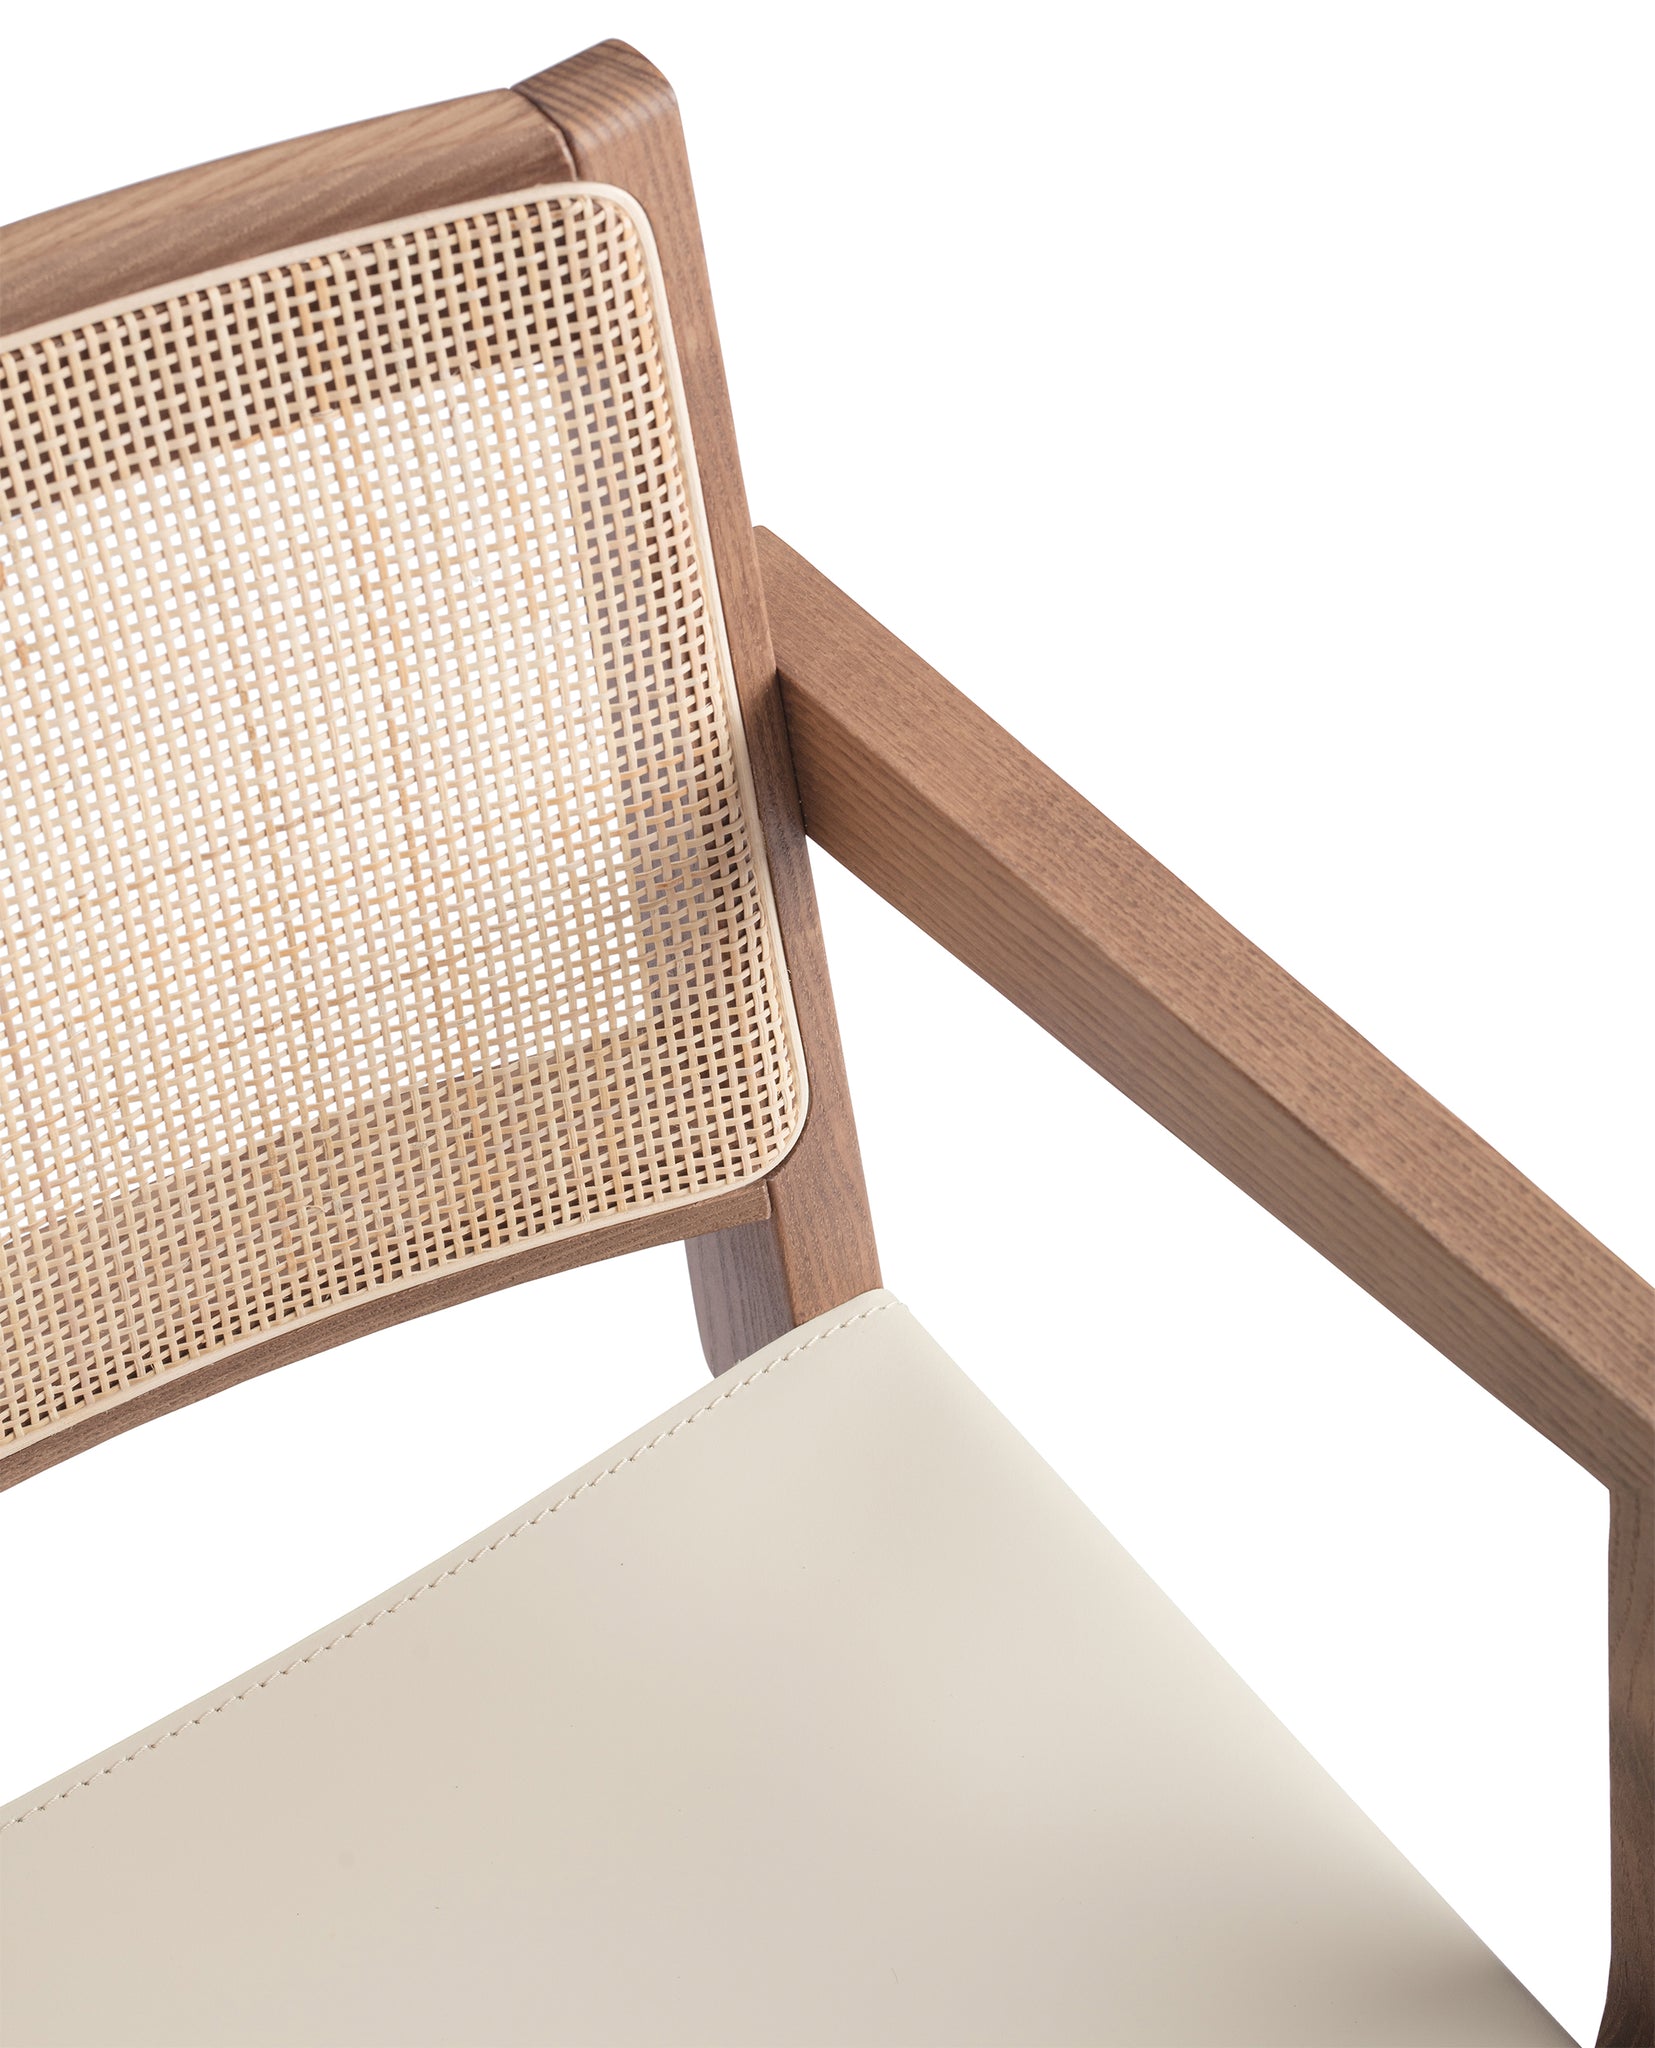 Close-up 1 of an "Elye" designer dining chair, walnut stained ash frame, square weave cane back, contract grade off white leather seat, produced by Klarel in Italy. #K40-1